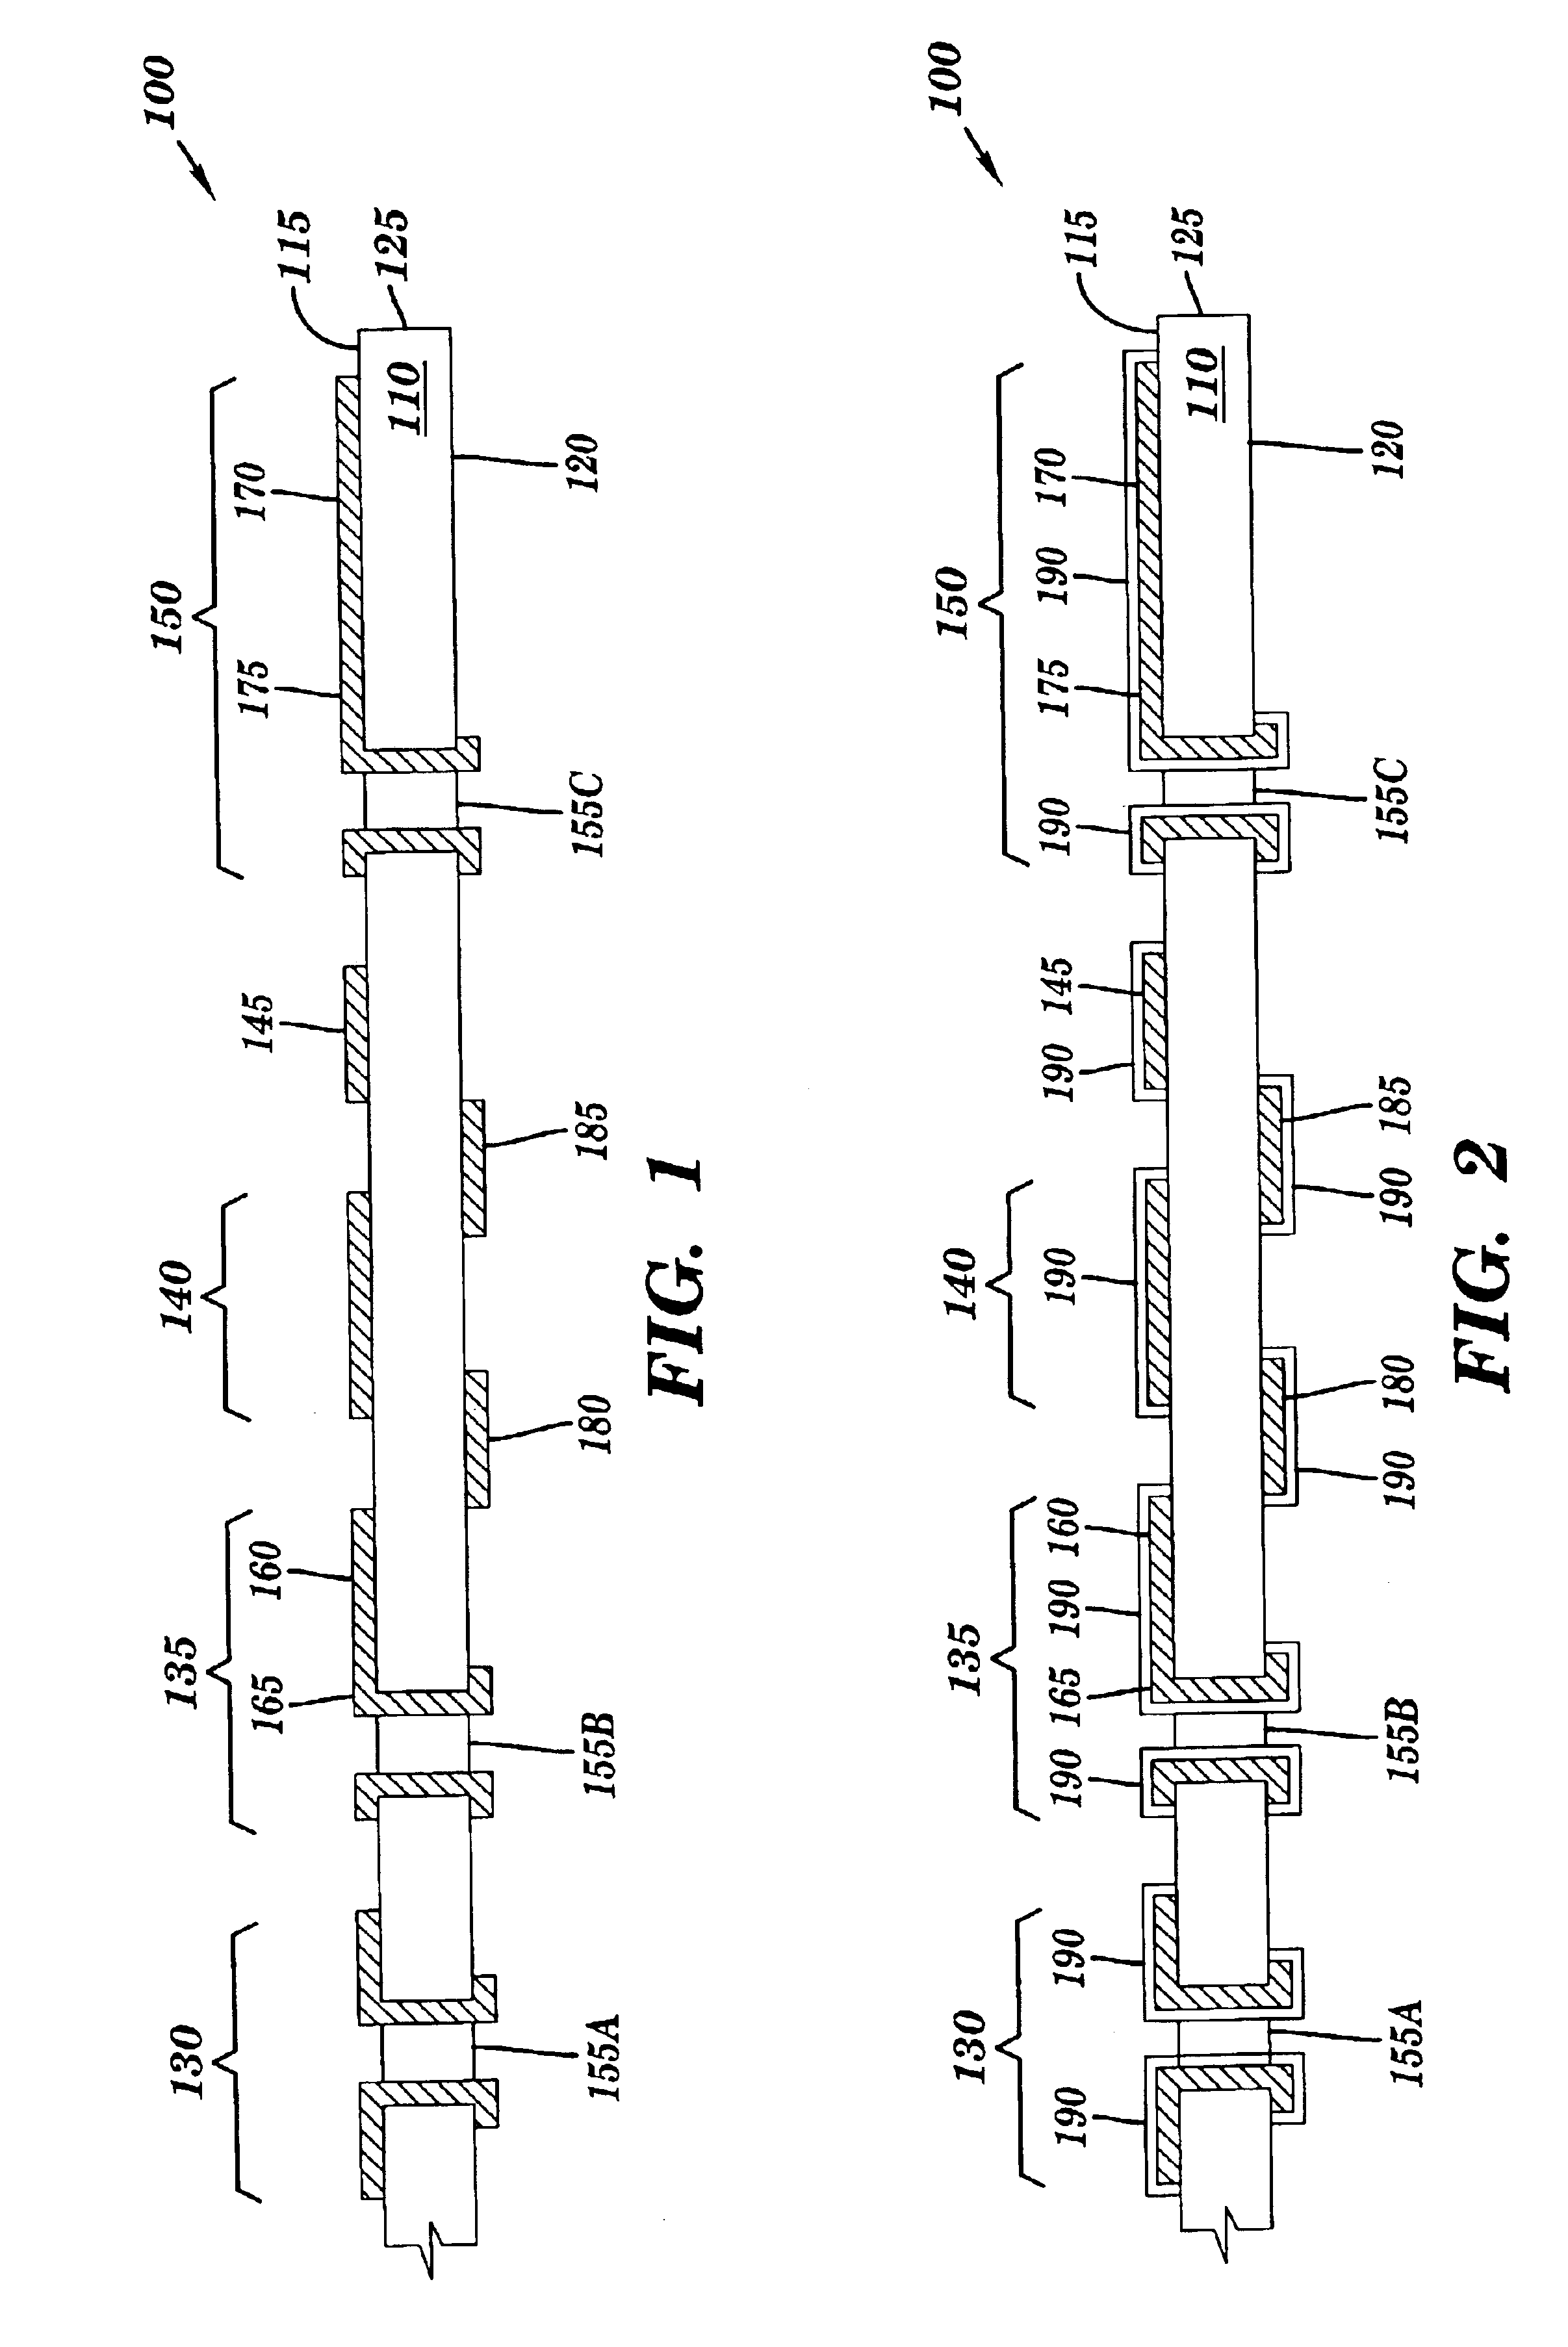 Method of fabricating printed circuit board with mixed metallurgy pads